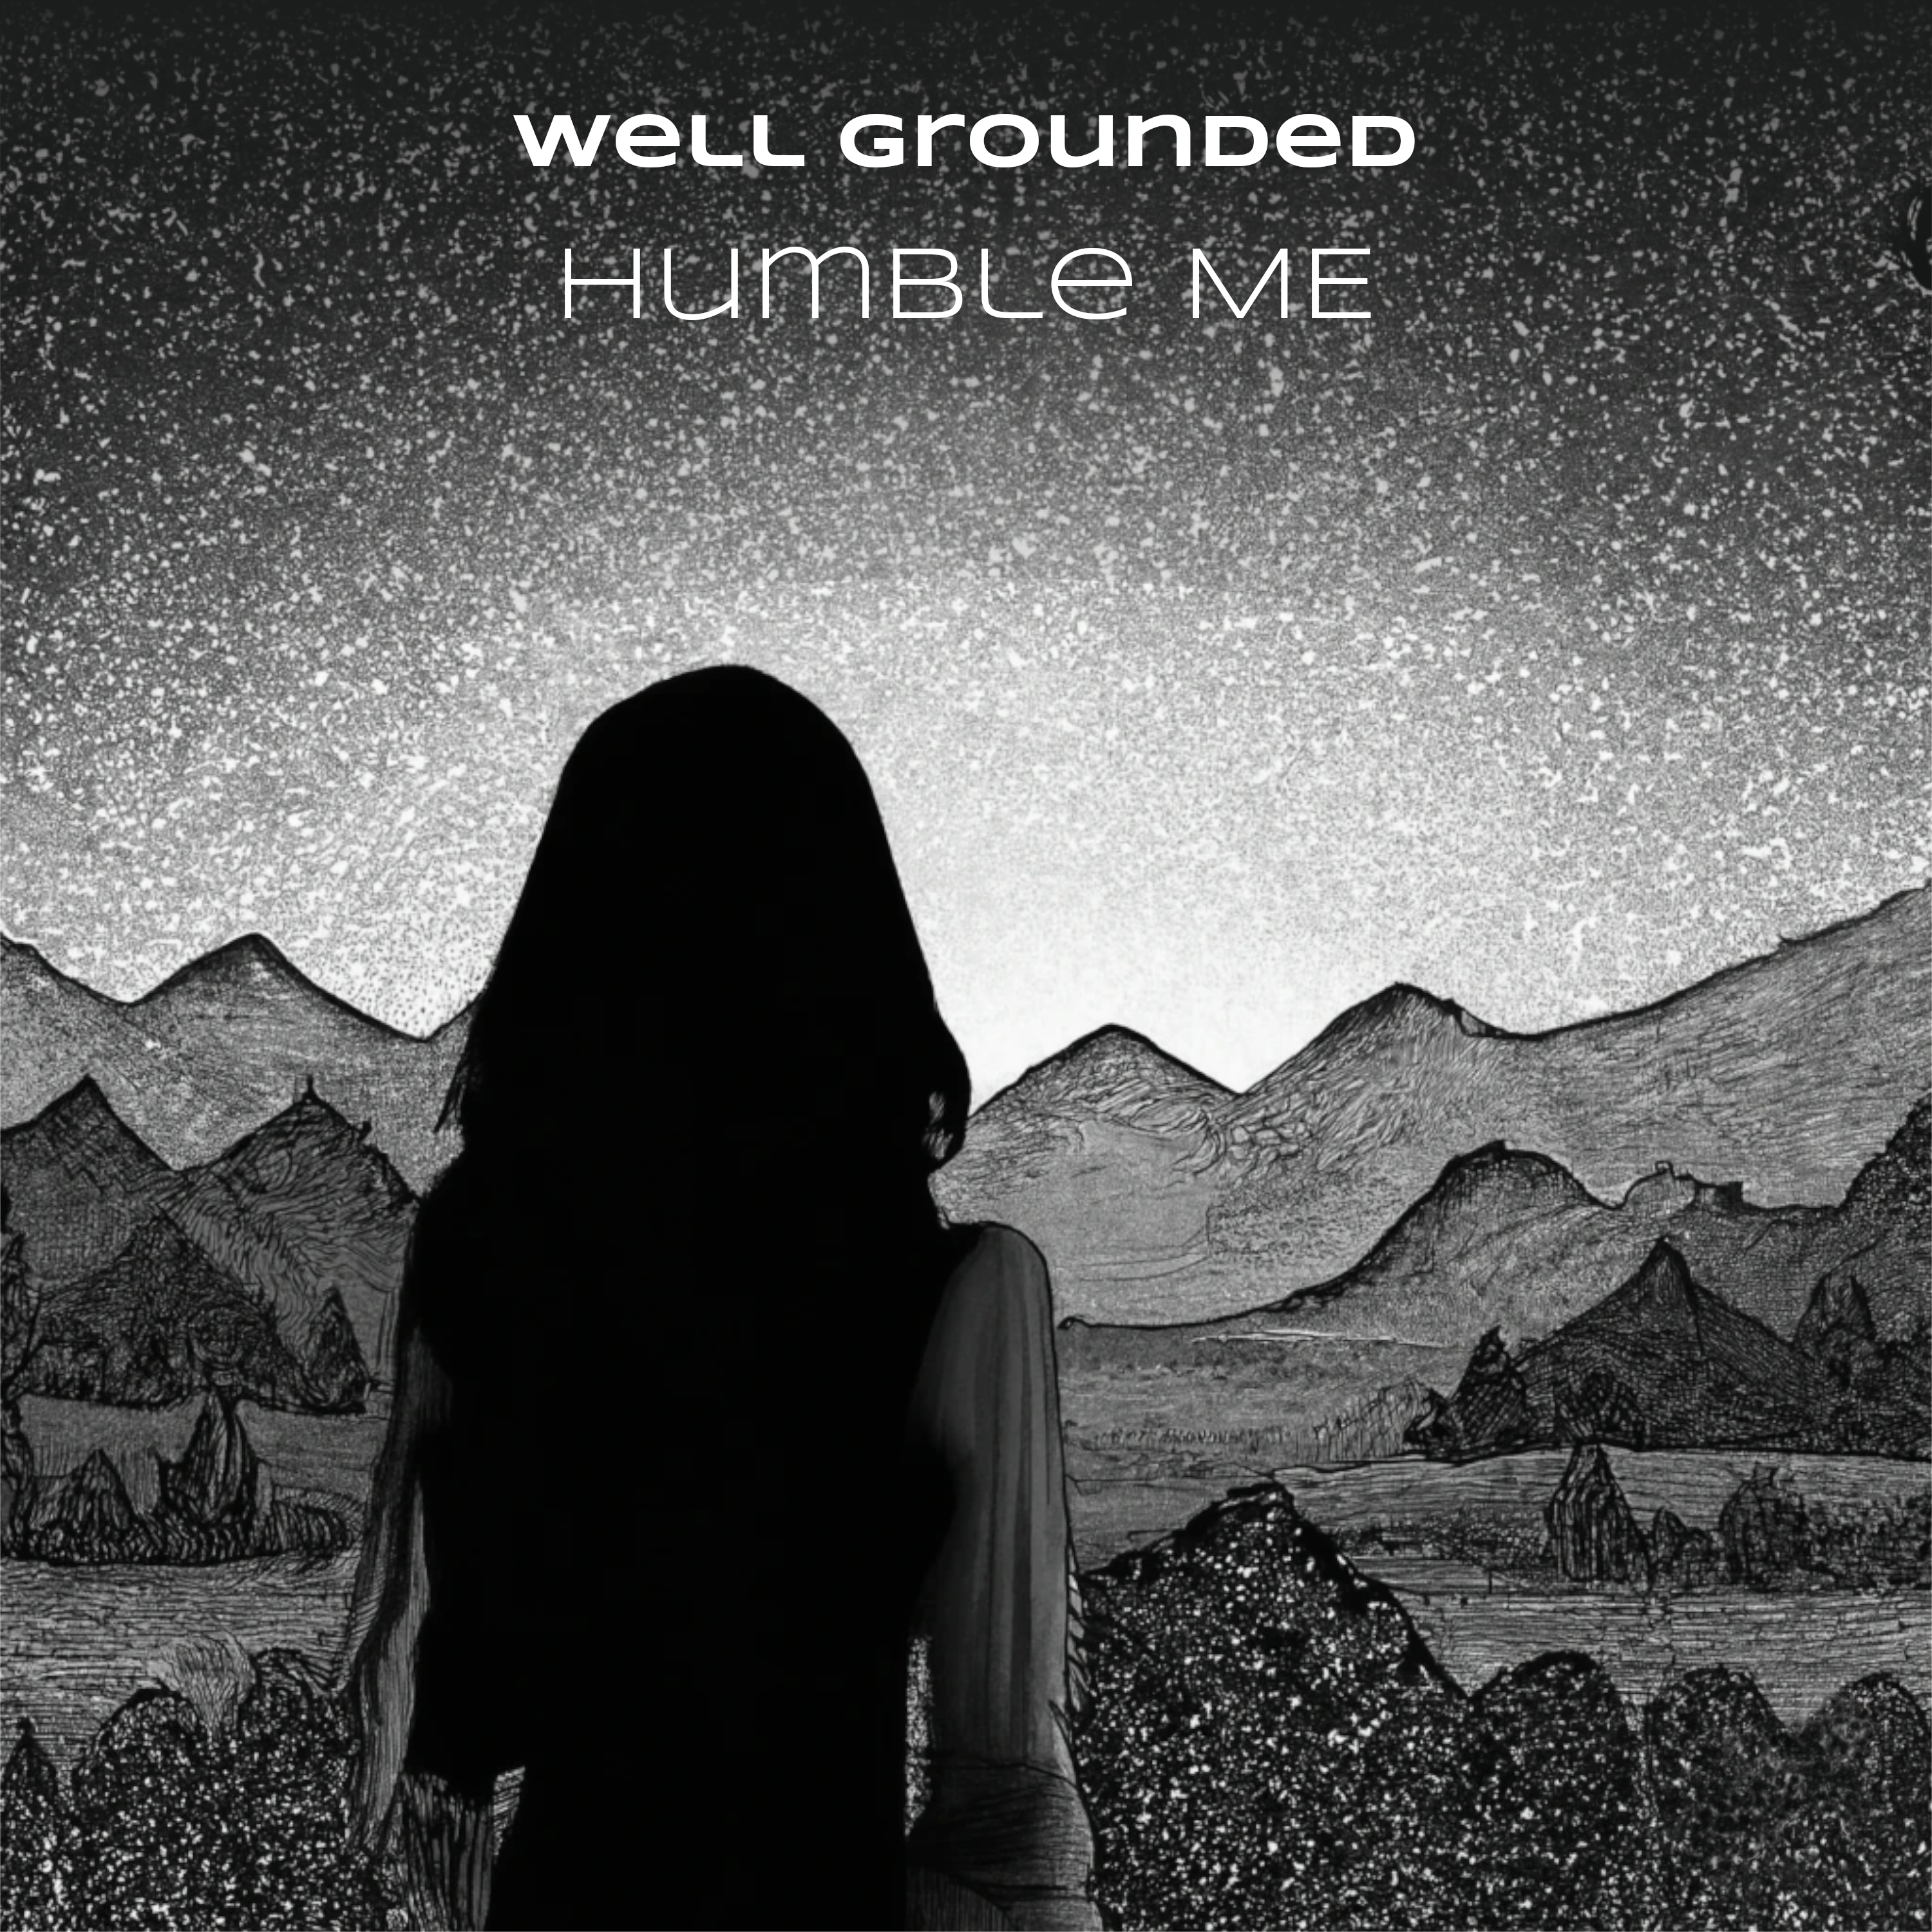 Cover art for 'Humble Me' by Well Grounded, an afrobeat cover of 'Humble Mi' by Jah9.